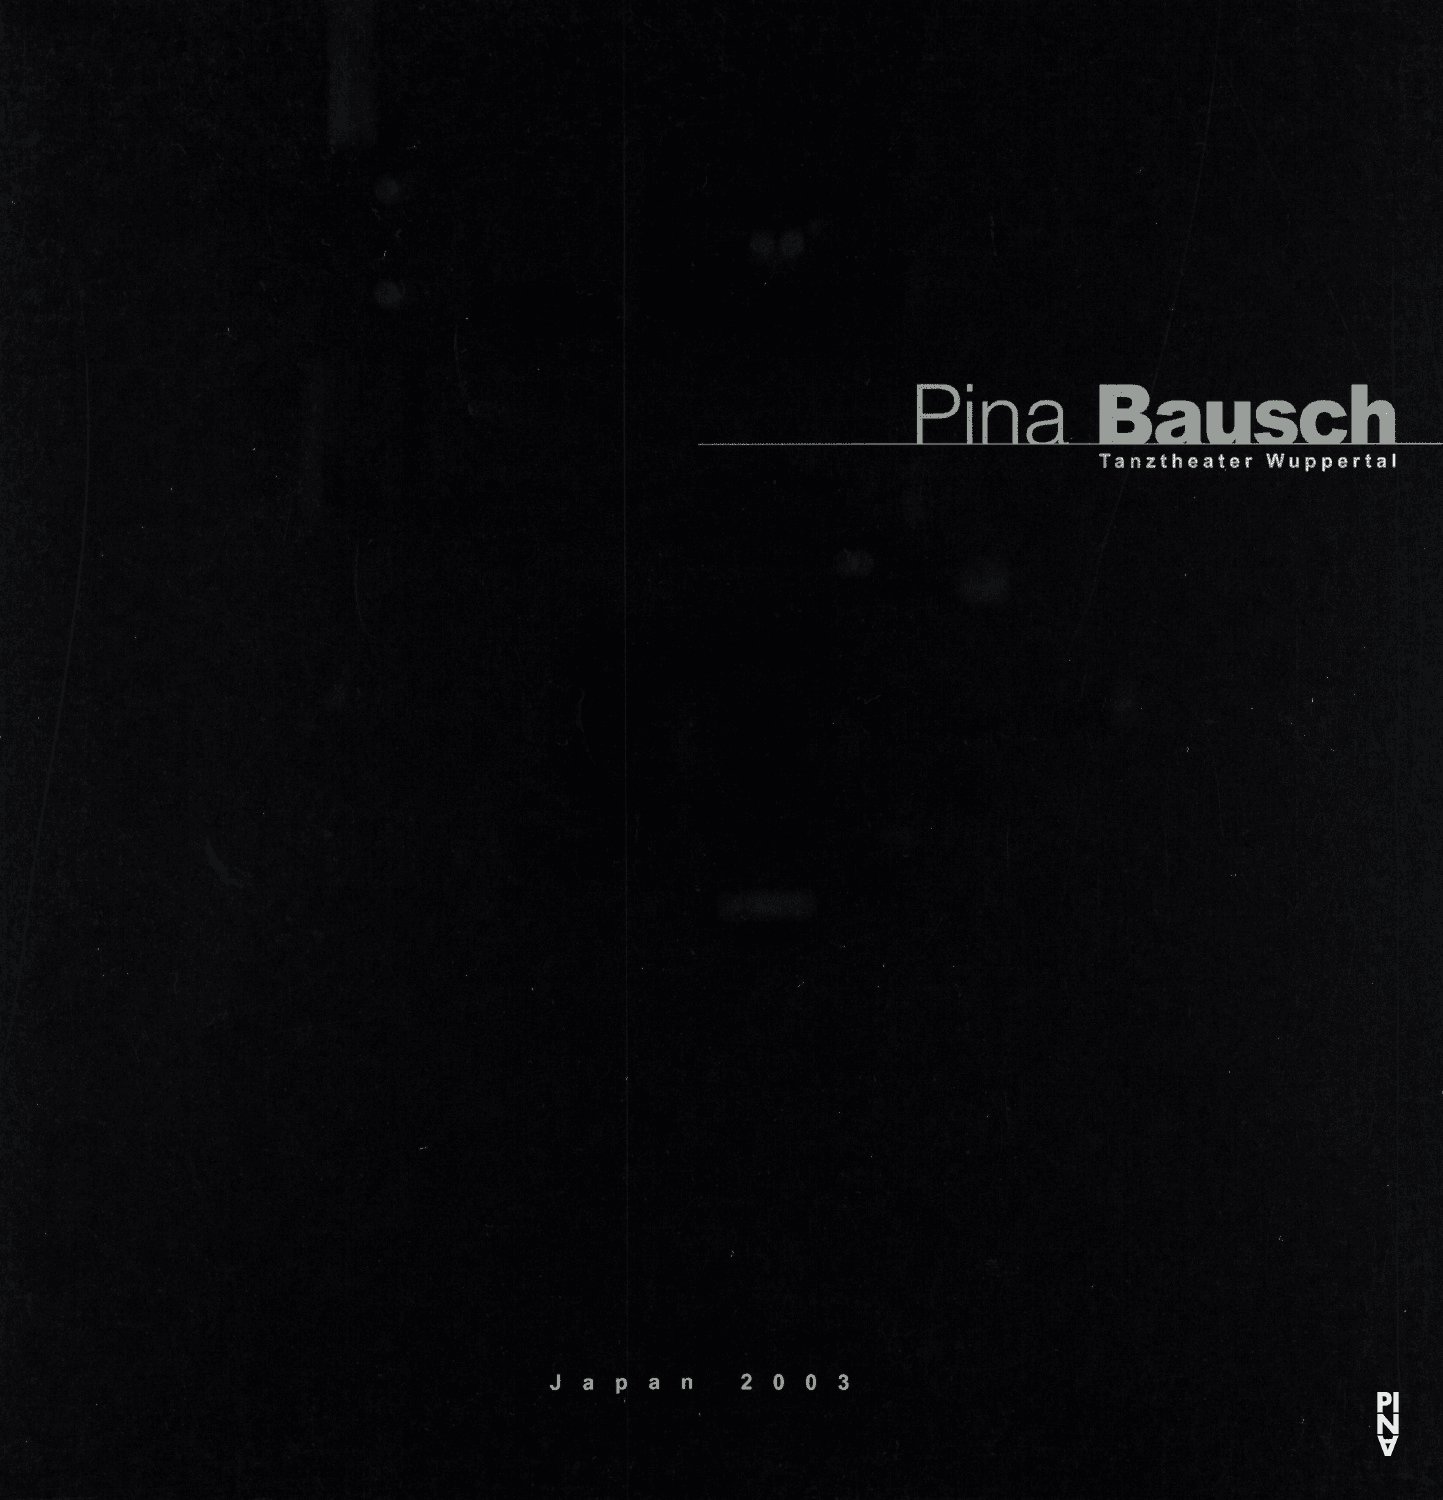 Booklet for “For the Children of Yesterday, Today and Tomorrow” by Pina Bausch with Tanztheater Wuppertal in in Tokyo, 11/14/2003 – 11/18/2003